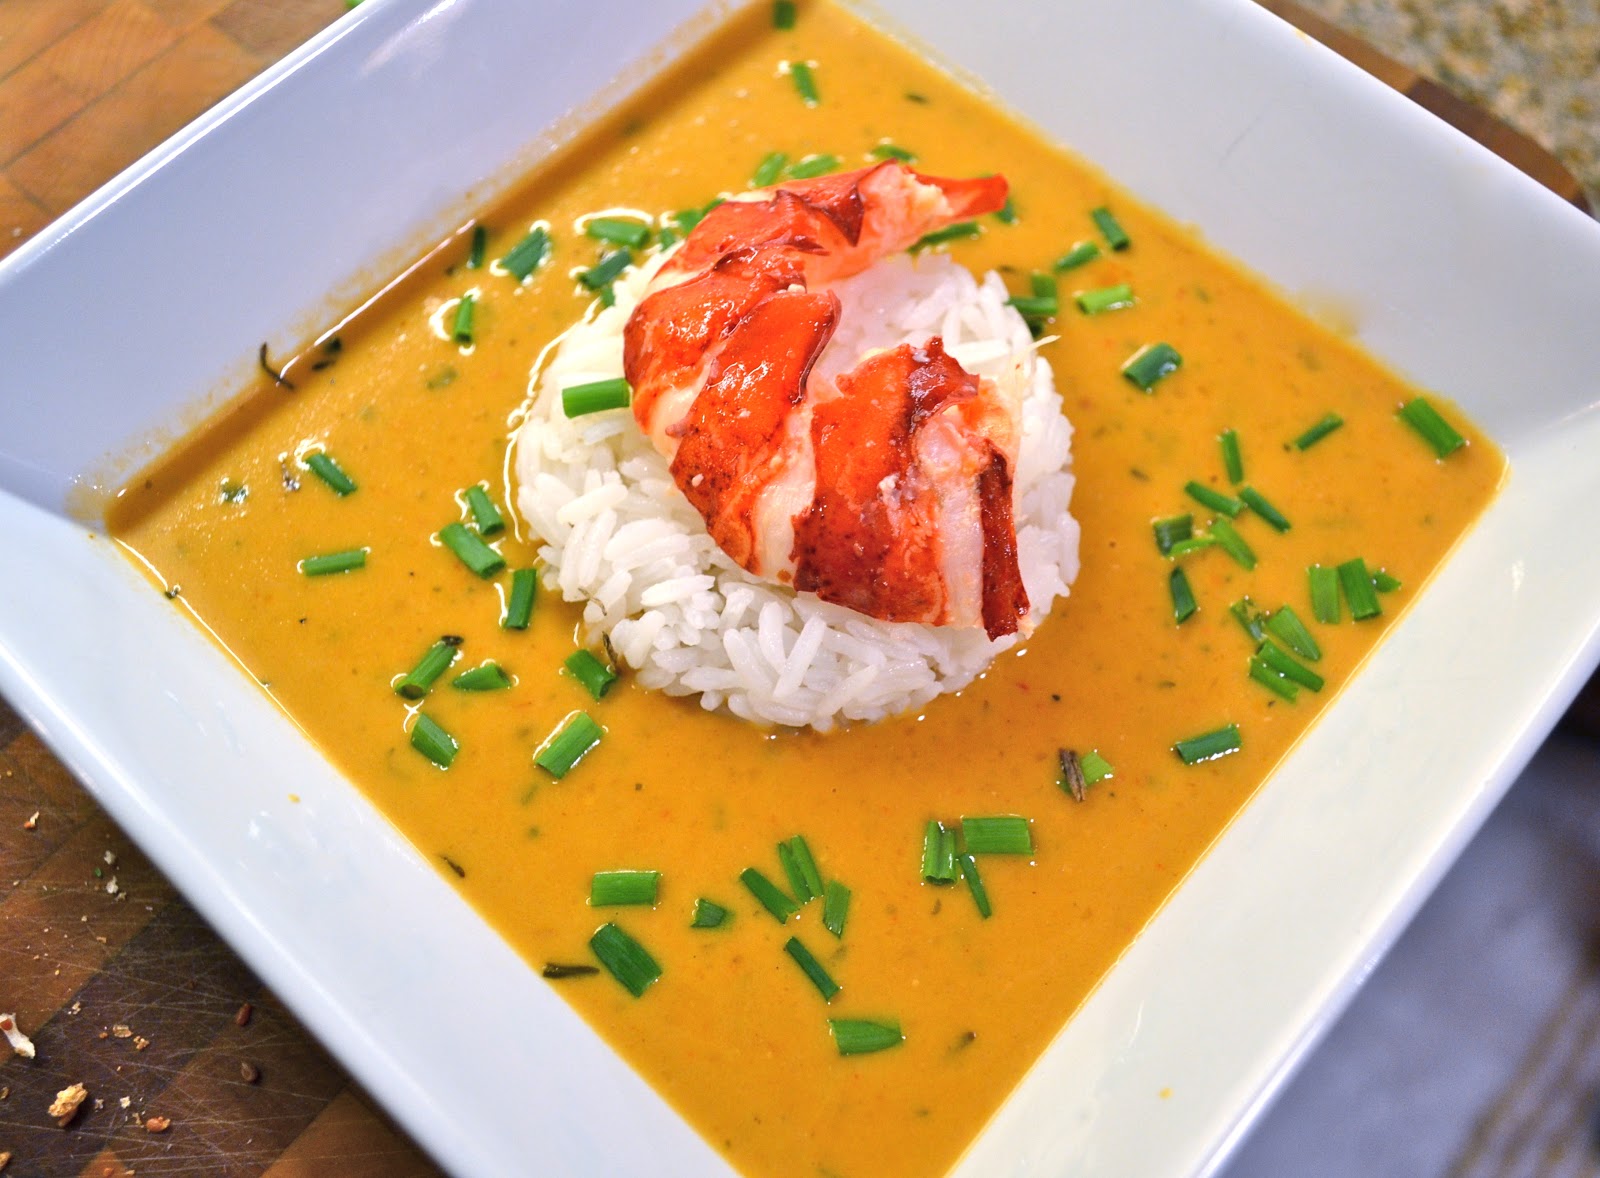 'Cause I wake up to a bowl of lobster bisque." 